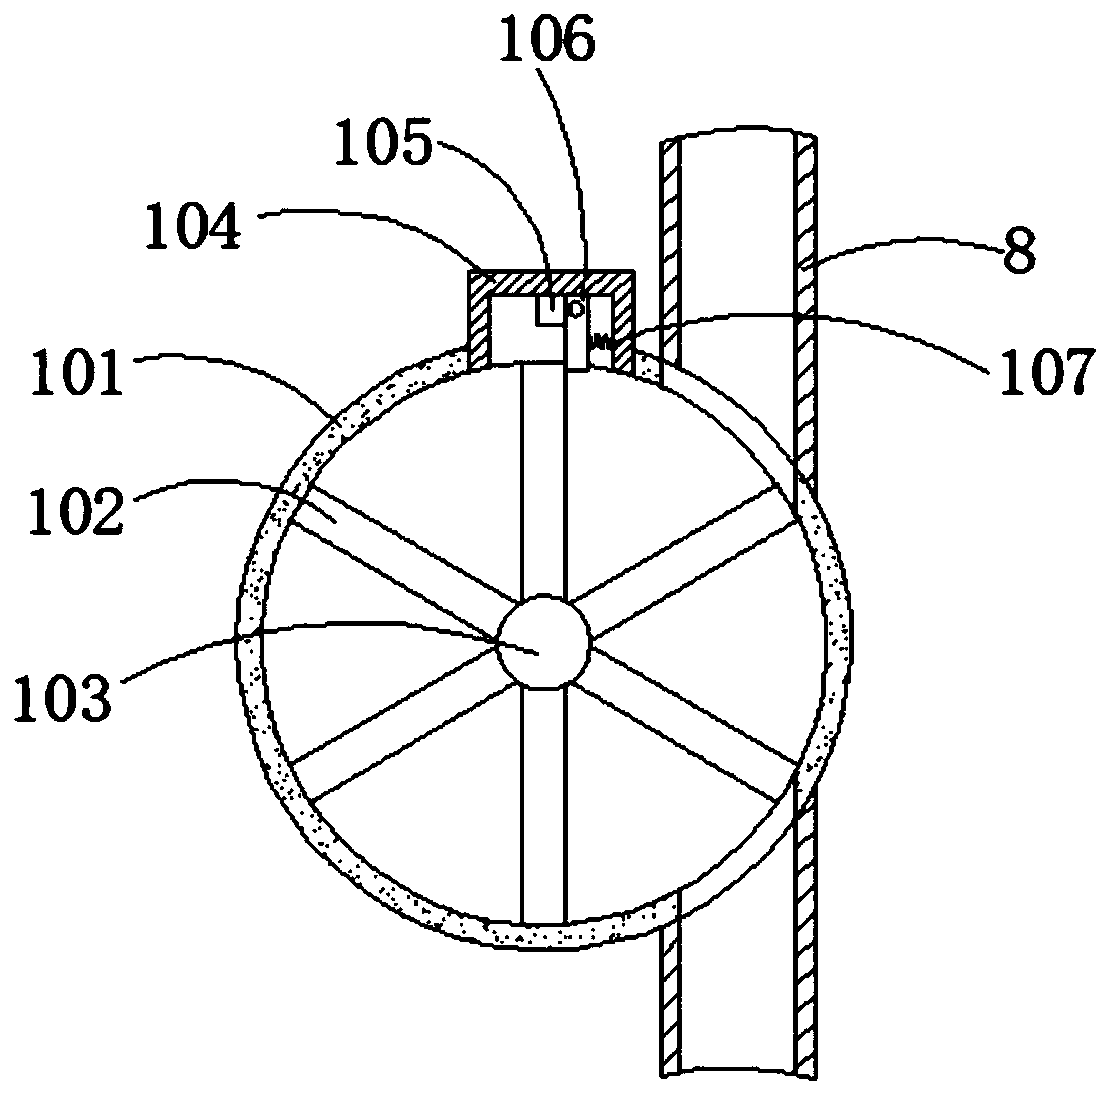 Grain particle sieving device